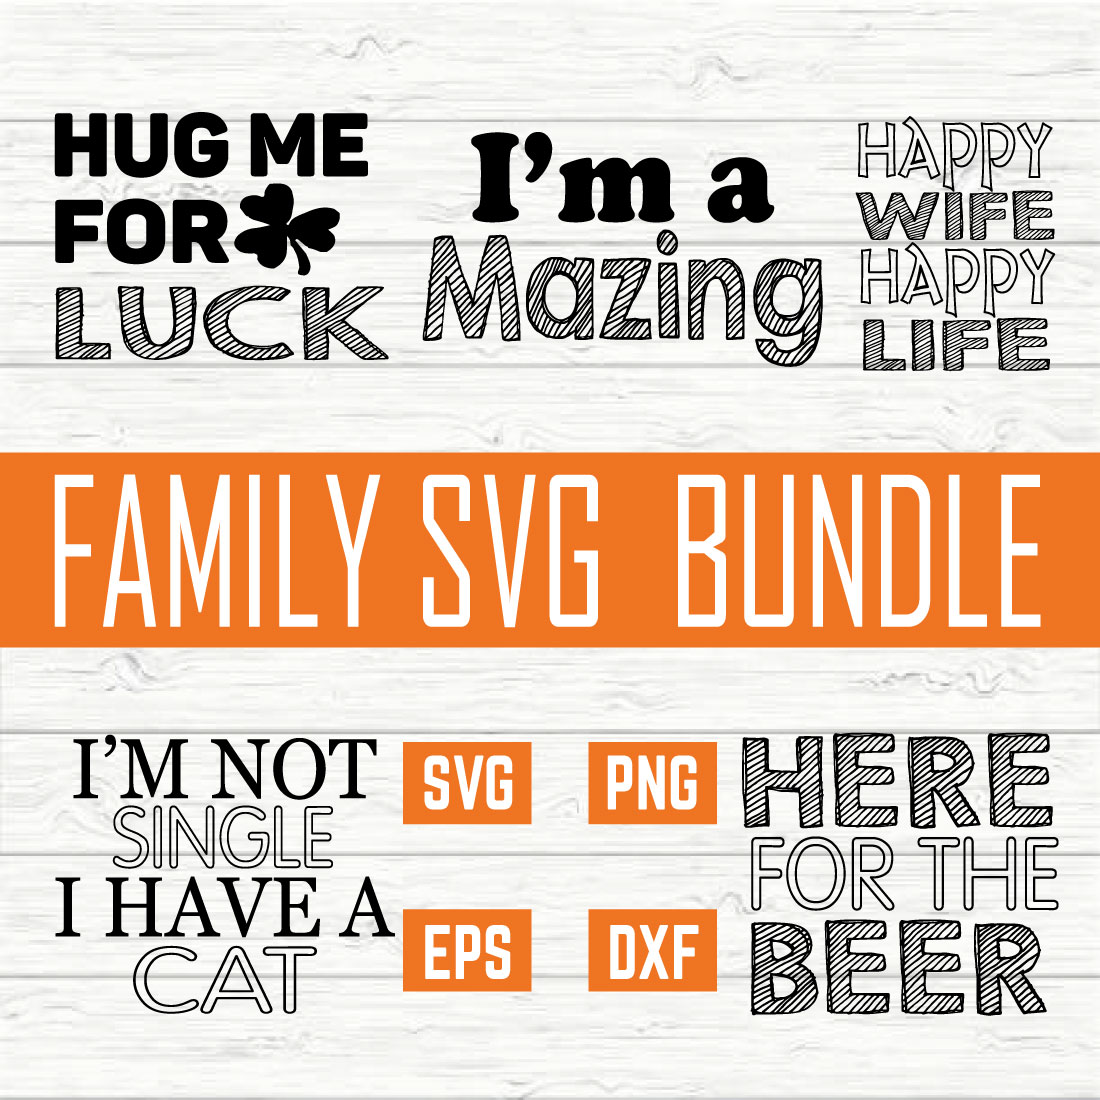 Family Typography Design Bundle vol 12 cover image.